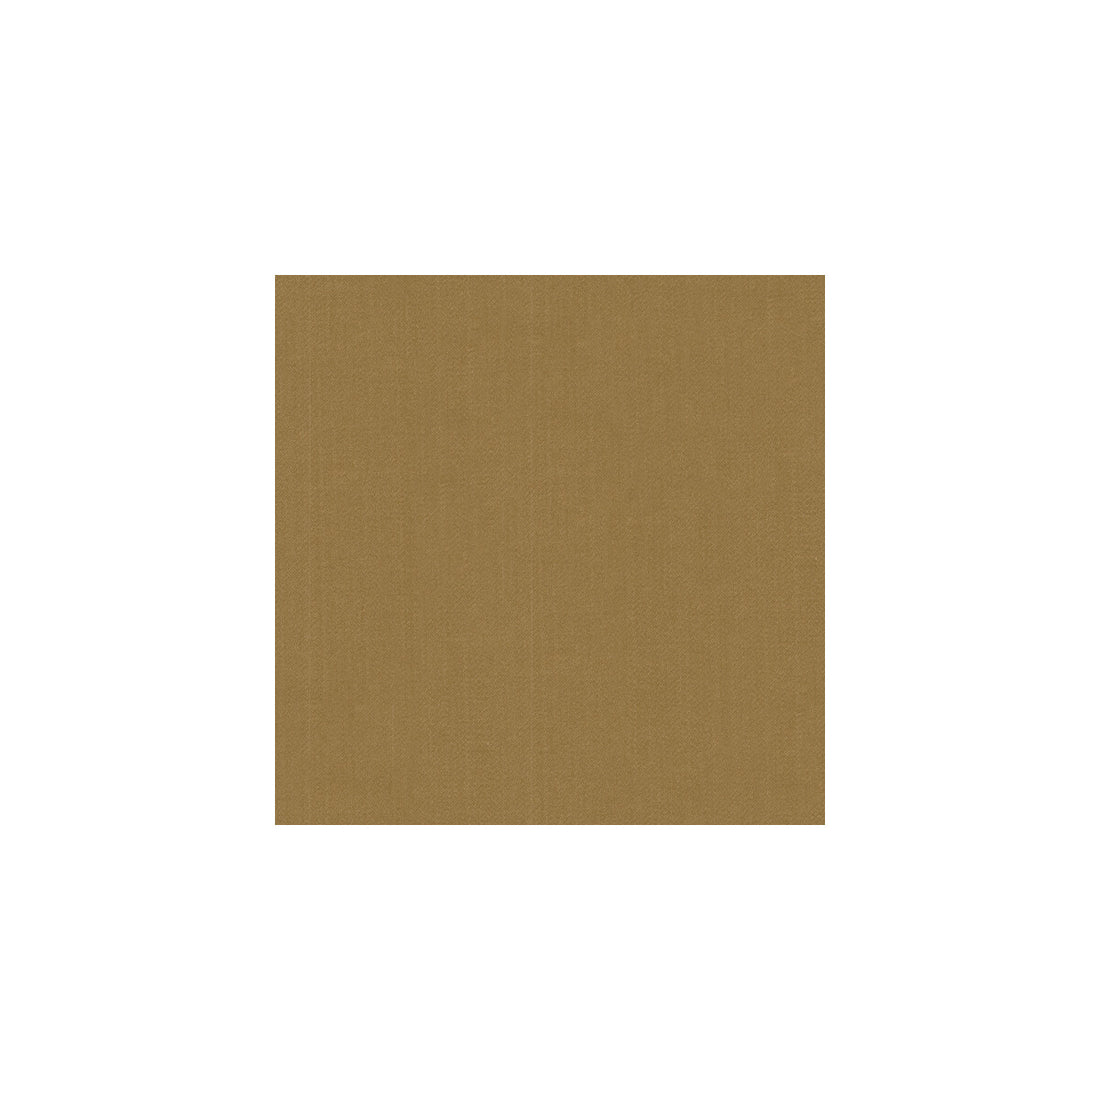 Satin Finish fabric in pecan color - pattern 31298.4.0 - by Kravet Couture